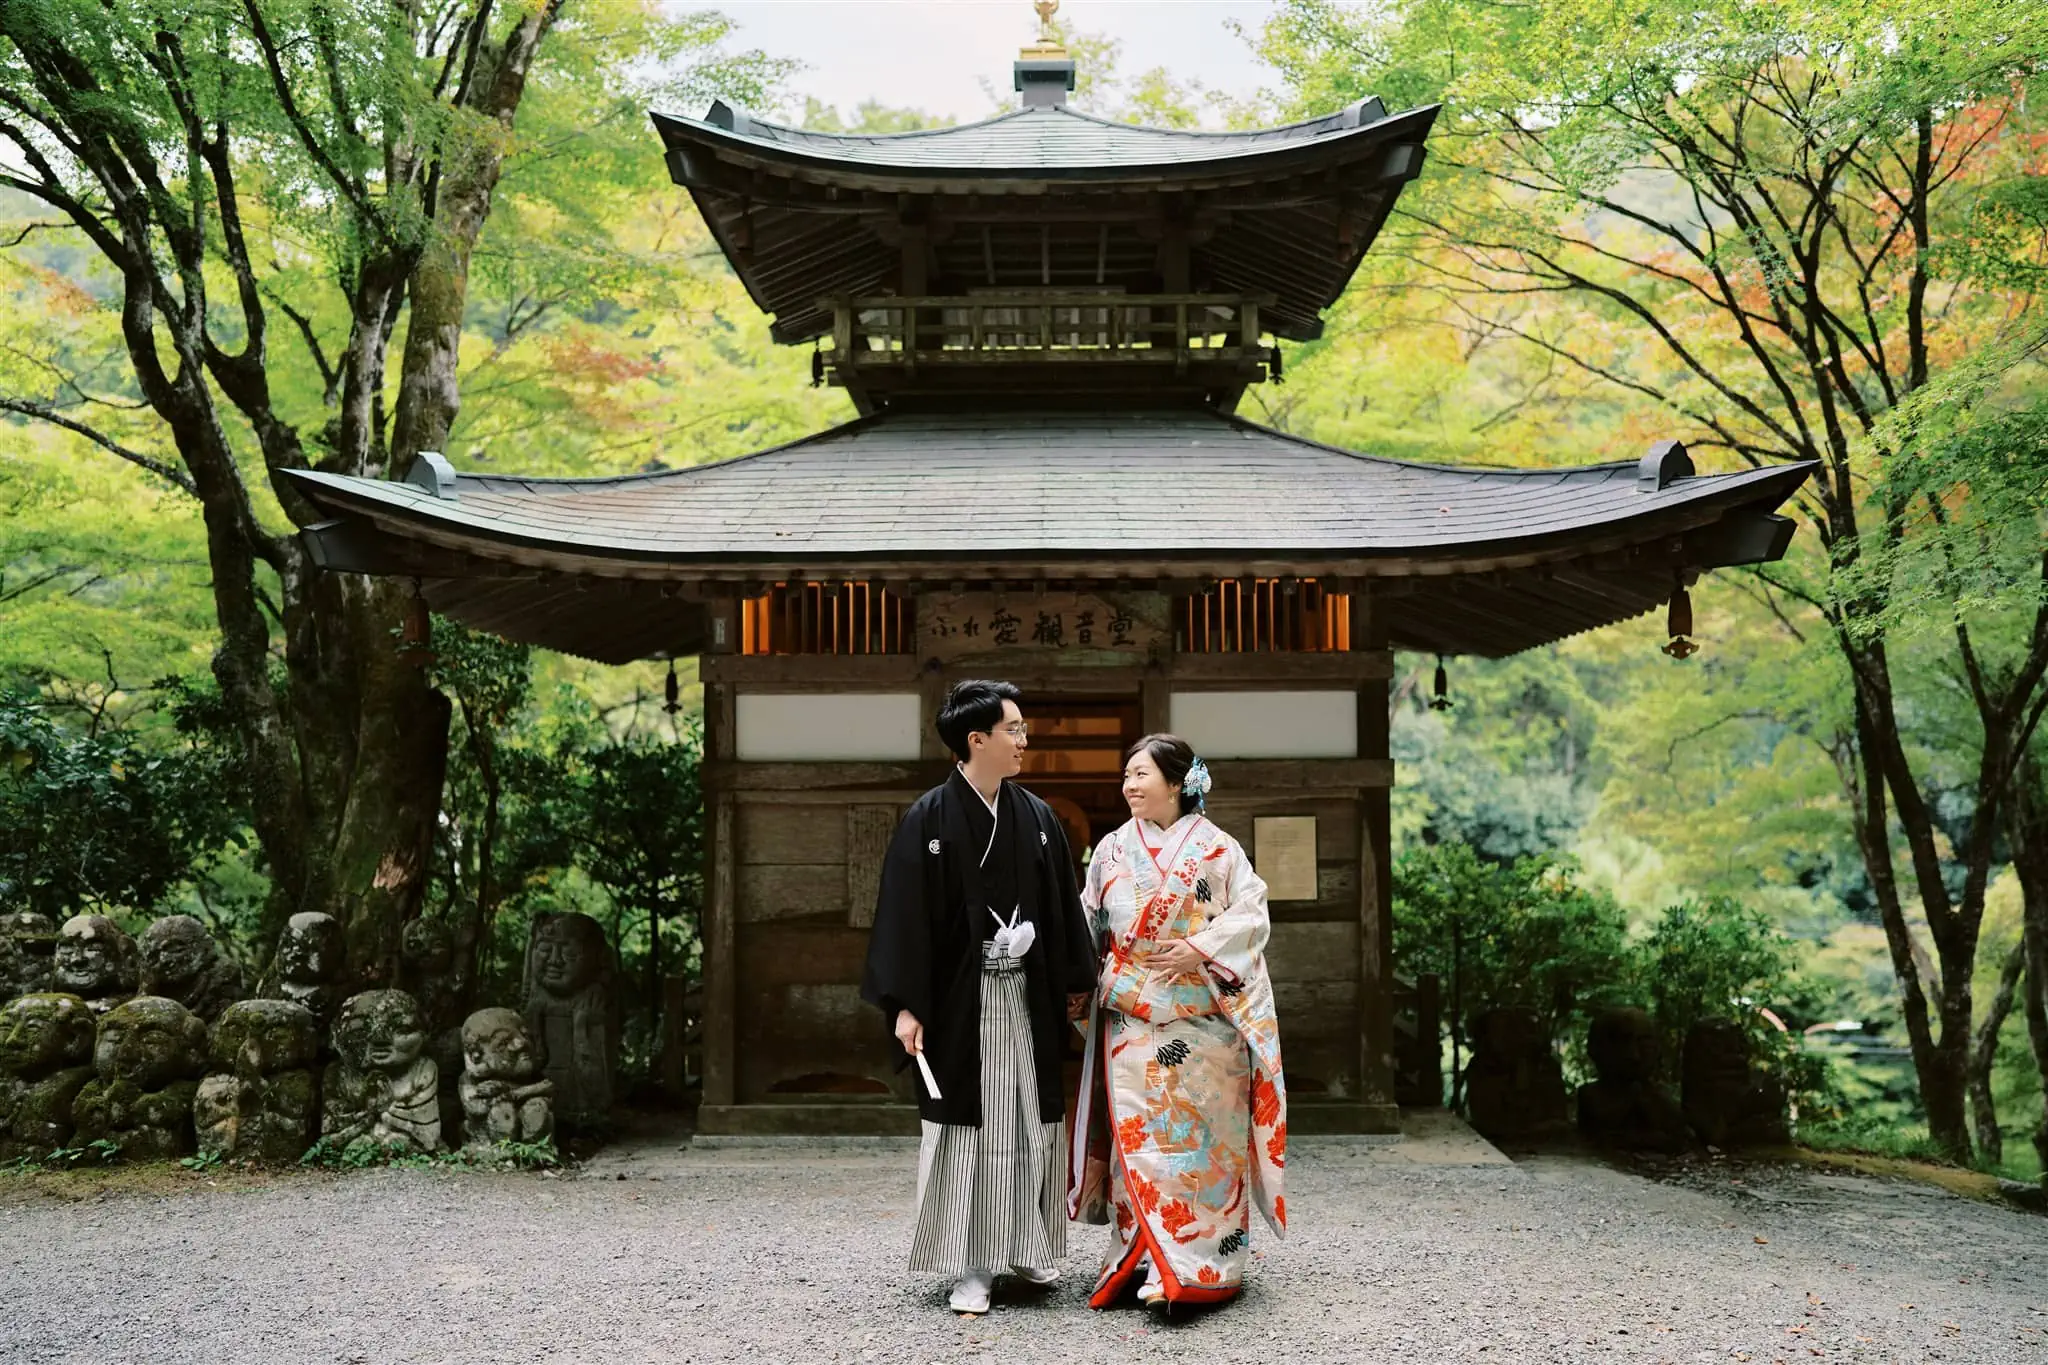 Kyoto Tokyo Japan Elopement Wedding Photographer, Planner & Videographer | An elopement photographer captures a Japanese couple standing elegantly in front of a pagoda.